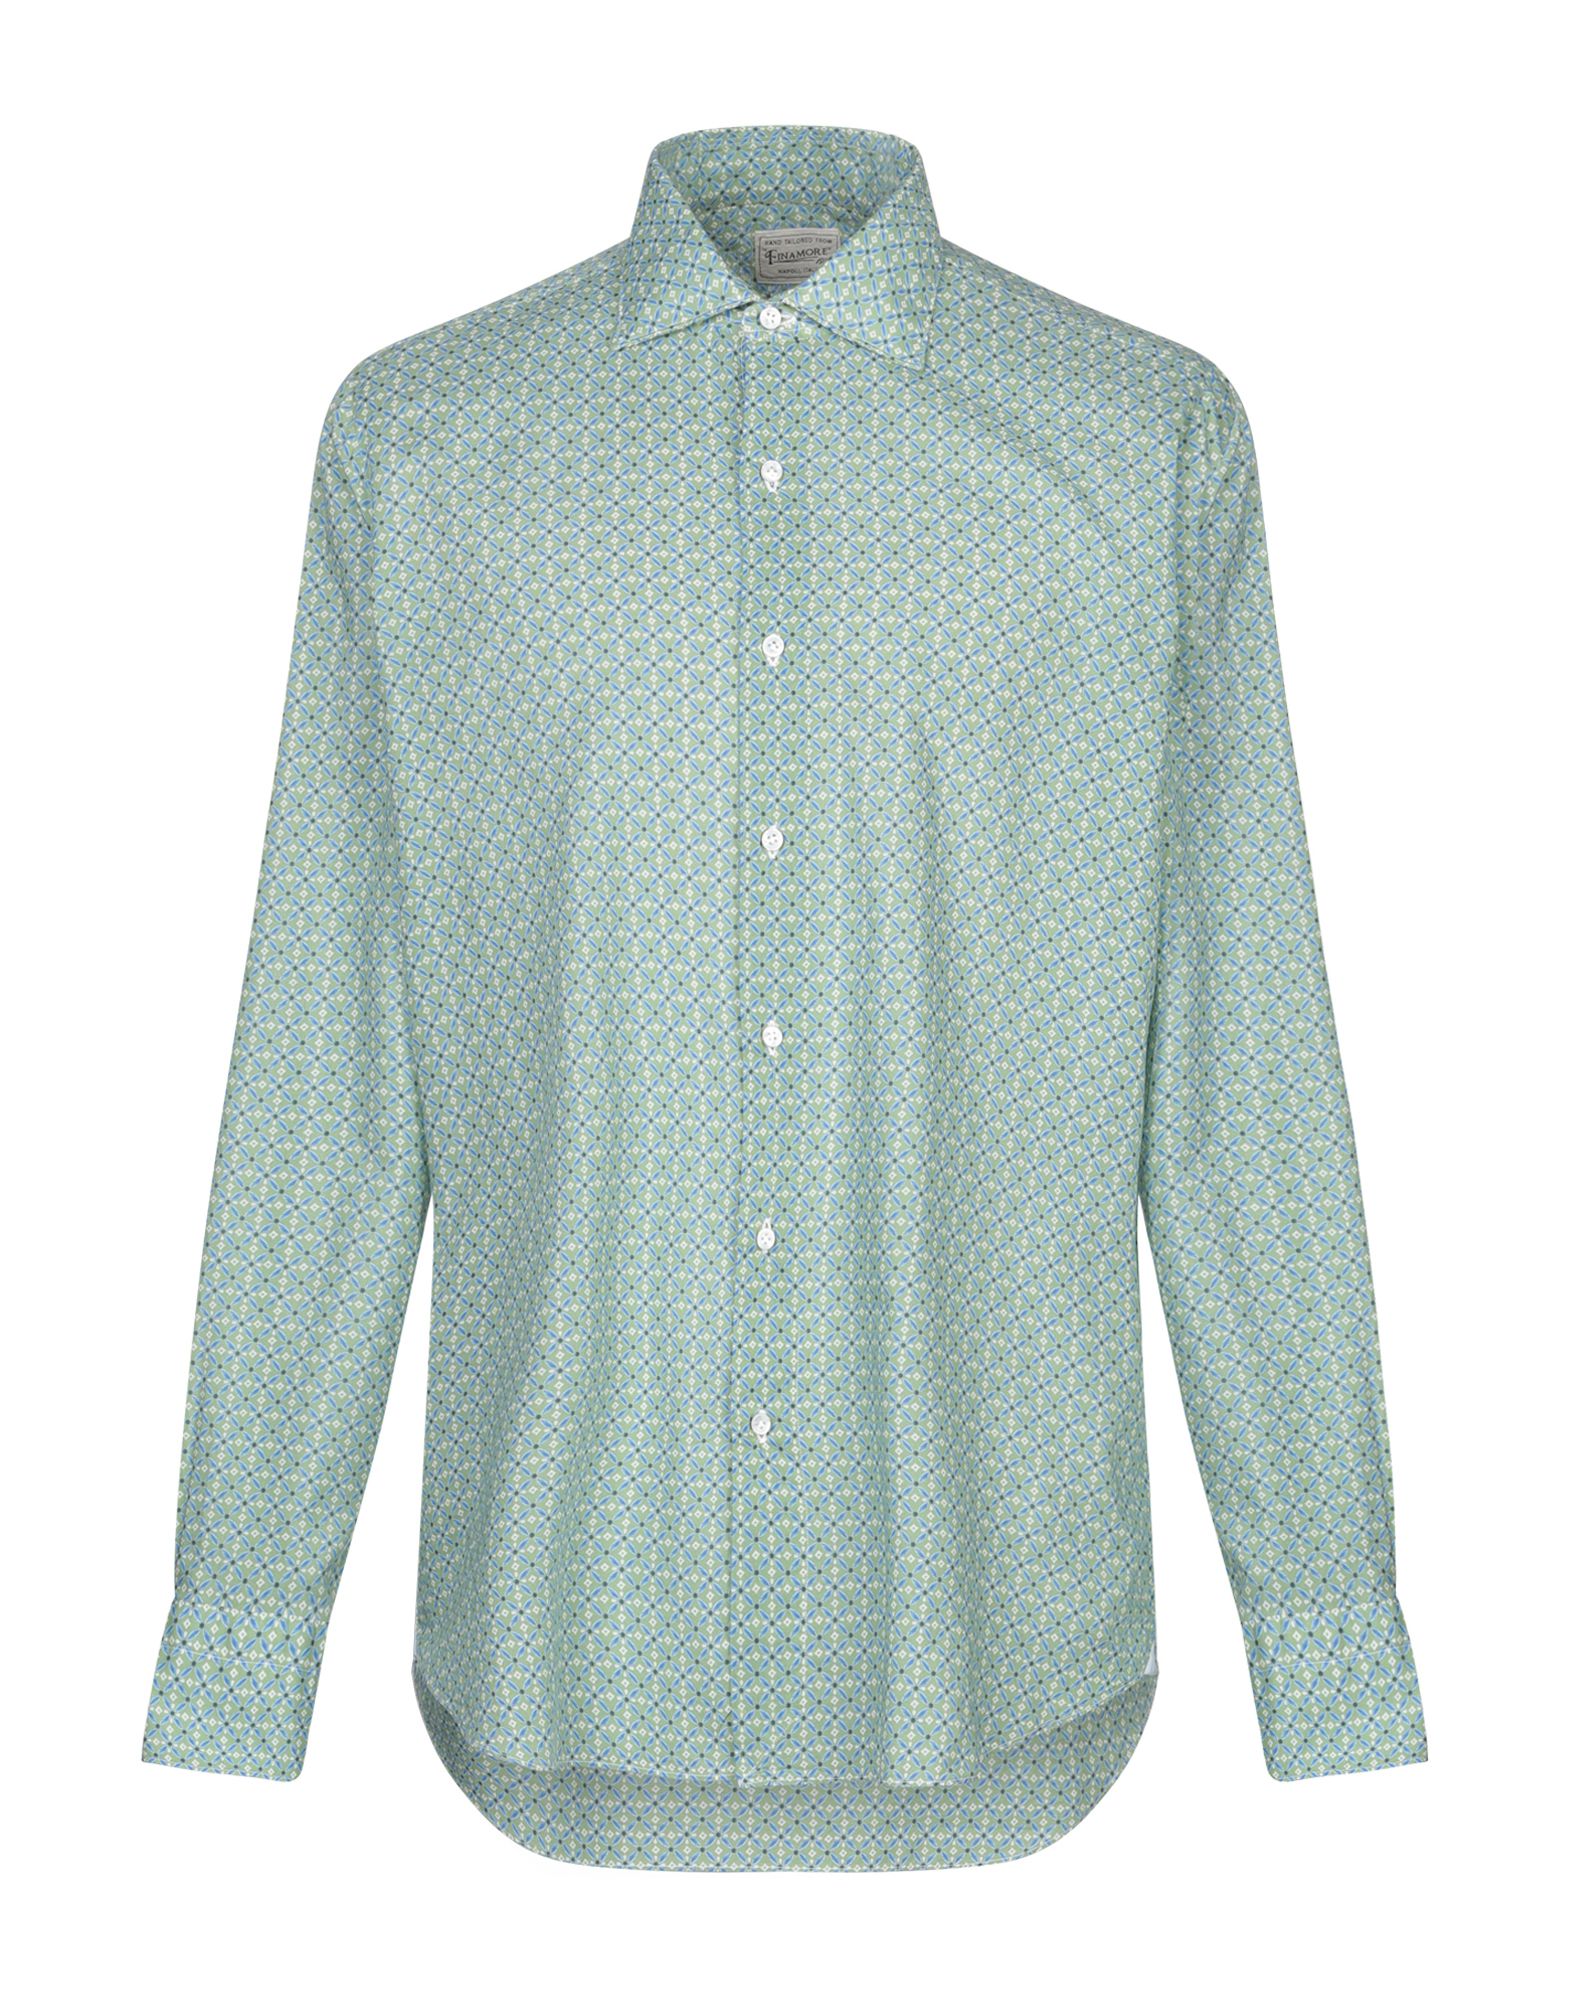 FINAMORE Patterned shirt,38826156DH 3